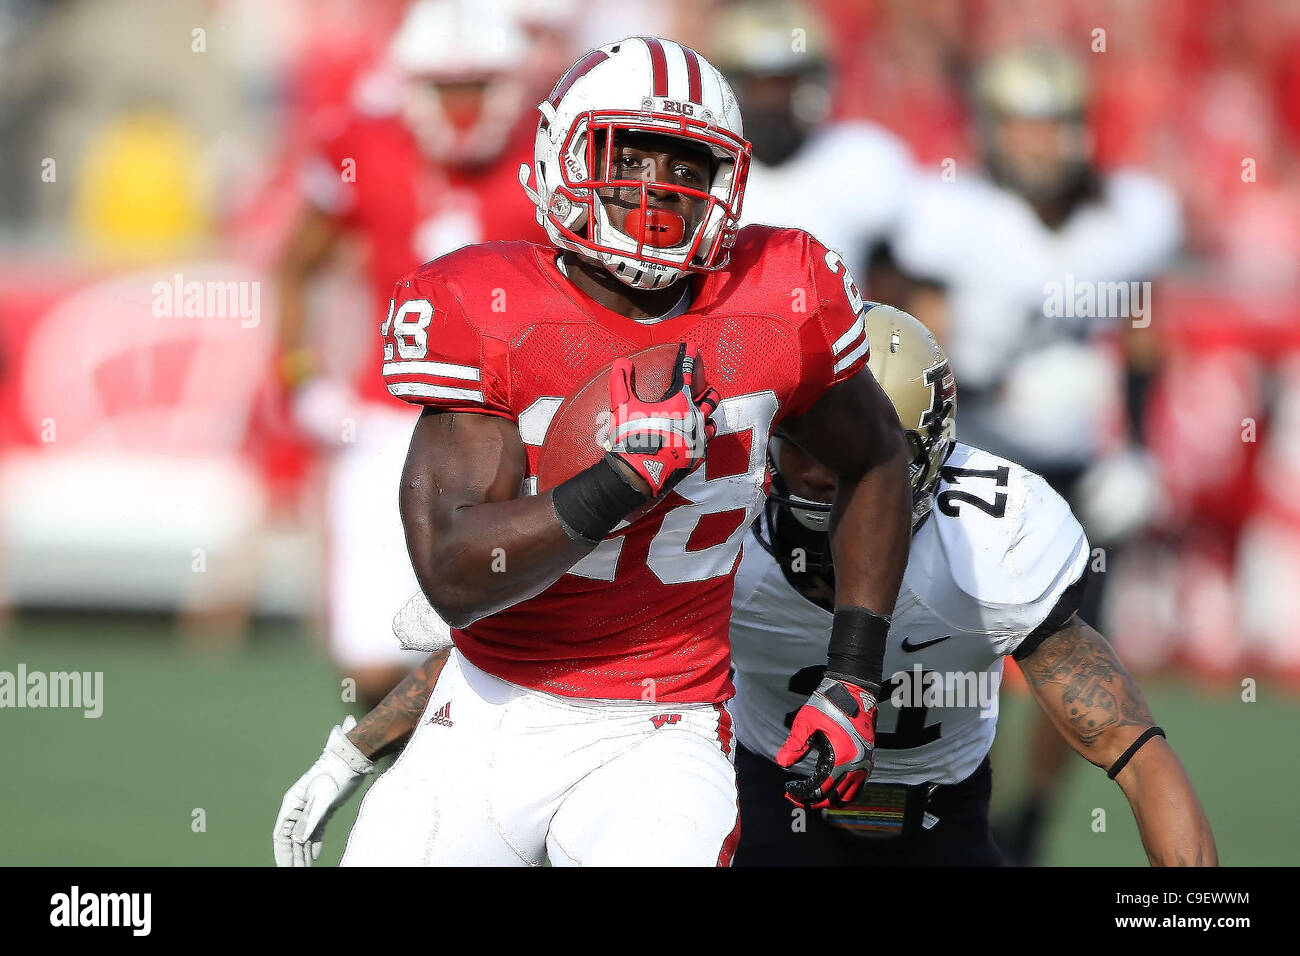 Nov. 5, 2011 - Madison, Wisconsin, U.S - Wisconsin running back Montee Ball #28 rushed for 223 yards on 20 carries and 3 touchdowns. The Wisconsin Badgers defeated the Purdue Boilermakers 62-17 at Camp Randall Stadium in Madison, Wisconsin. (Credit Image: © John Fisher/Southcreek/ZUMAPRESS.com) Stock Photo